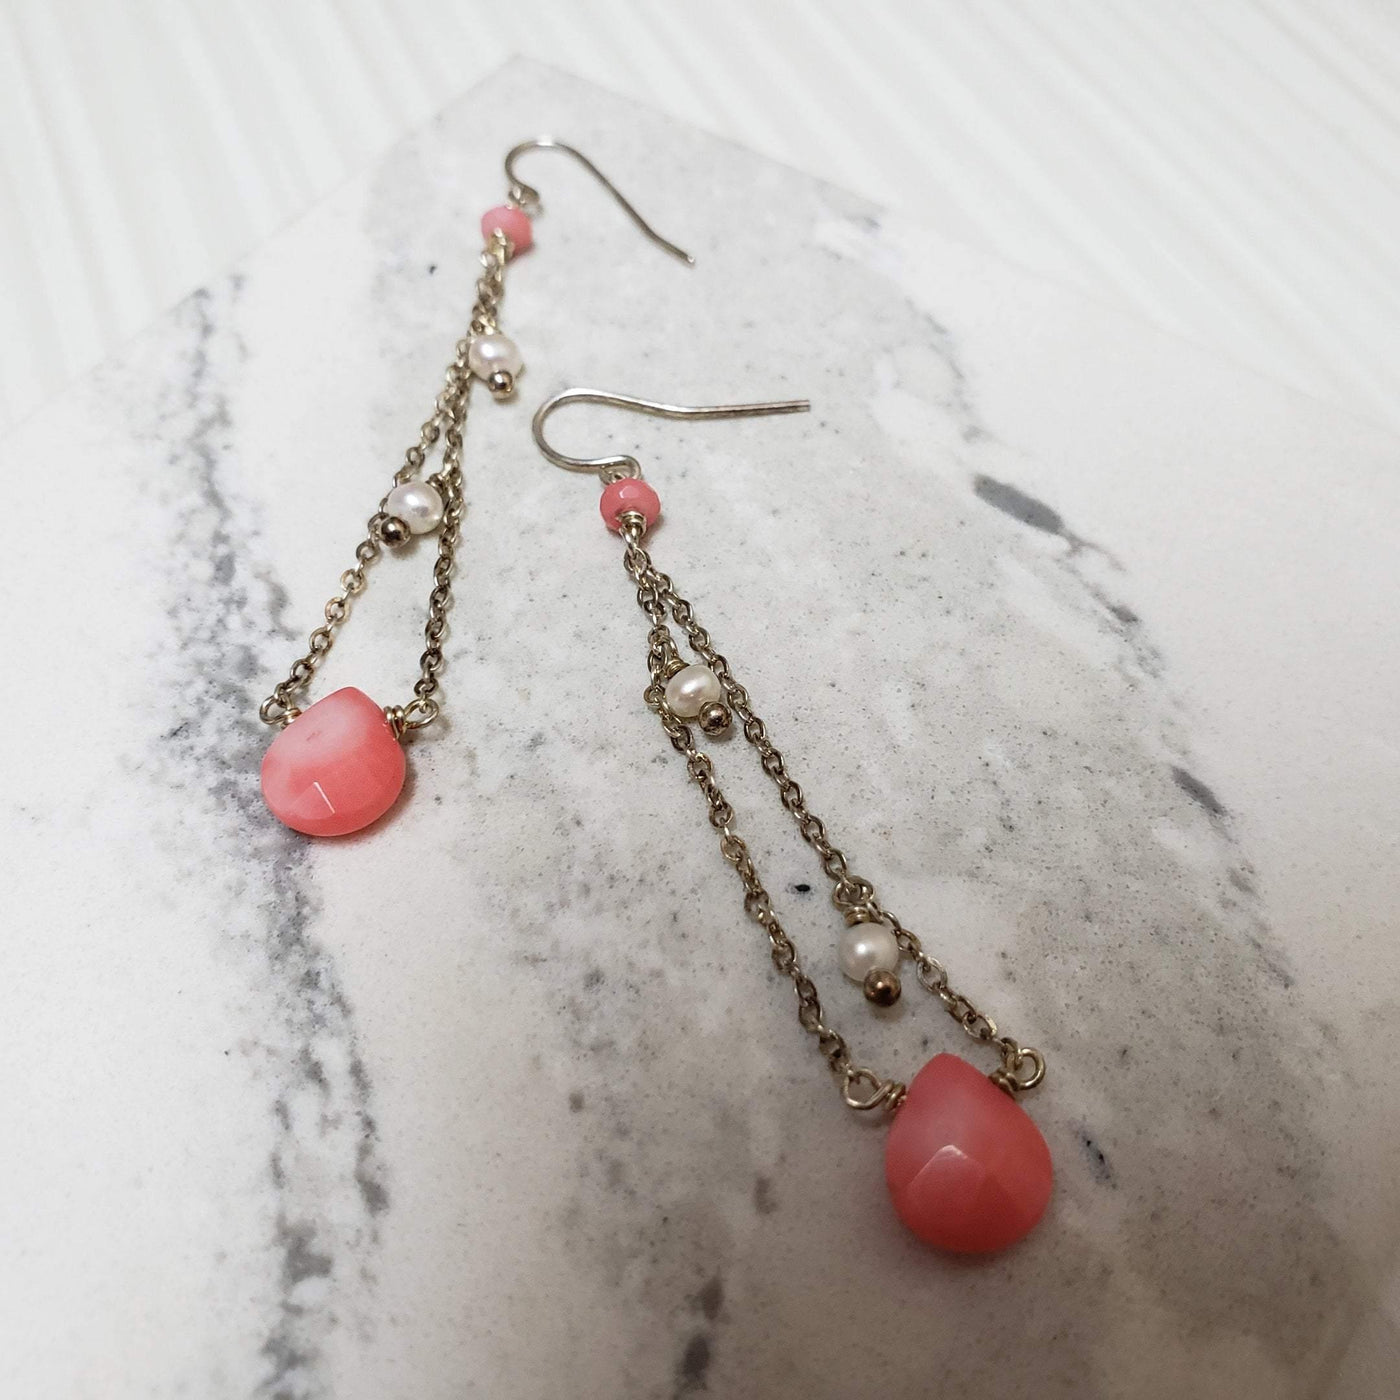 Stylish silver and pearl earrings - LB Designs